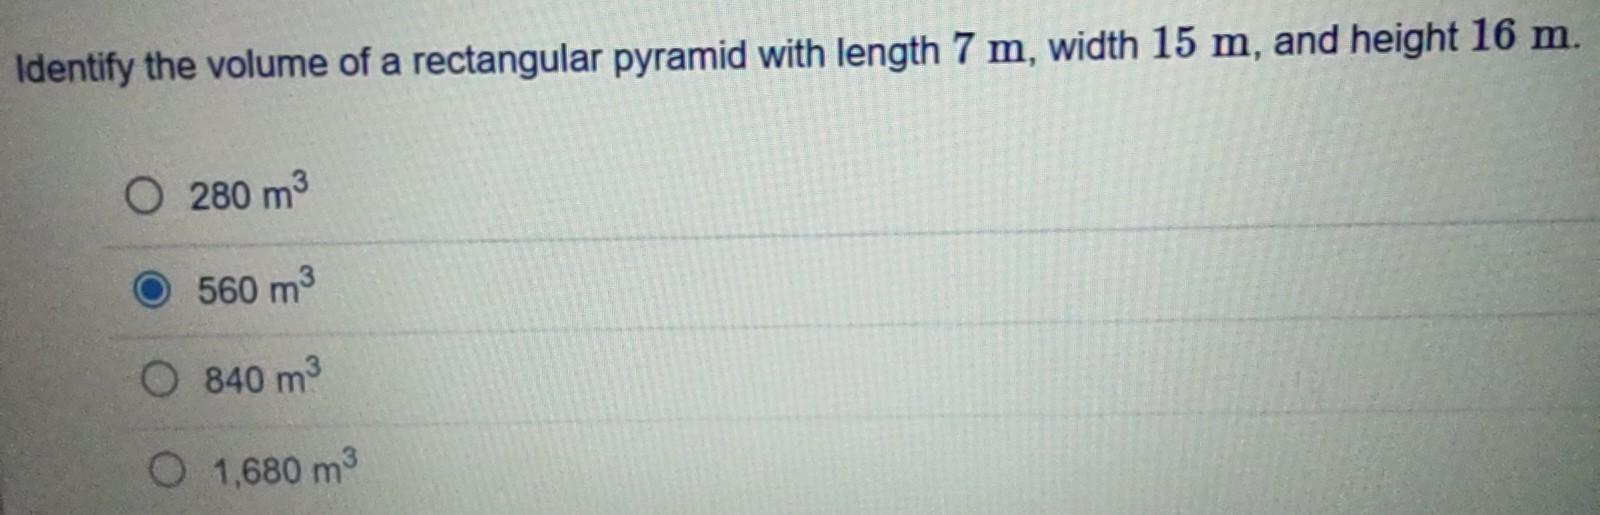 Identify The Volume Of A Rectangular Pyramid With Length 7 Cm, Width 15 Cm, And Height 16 M.